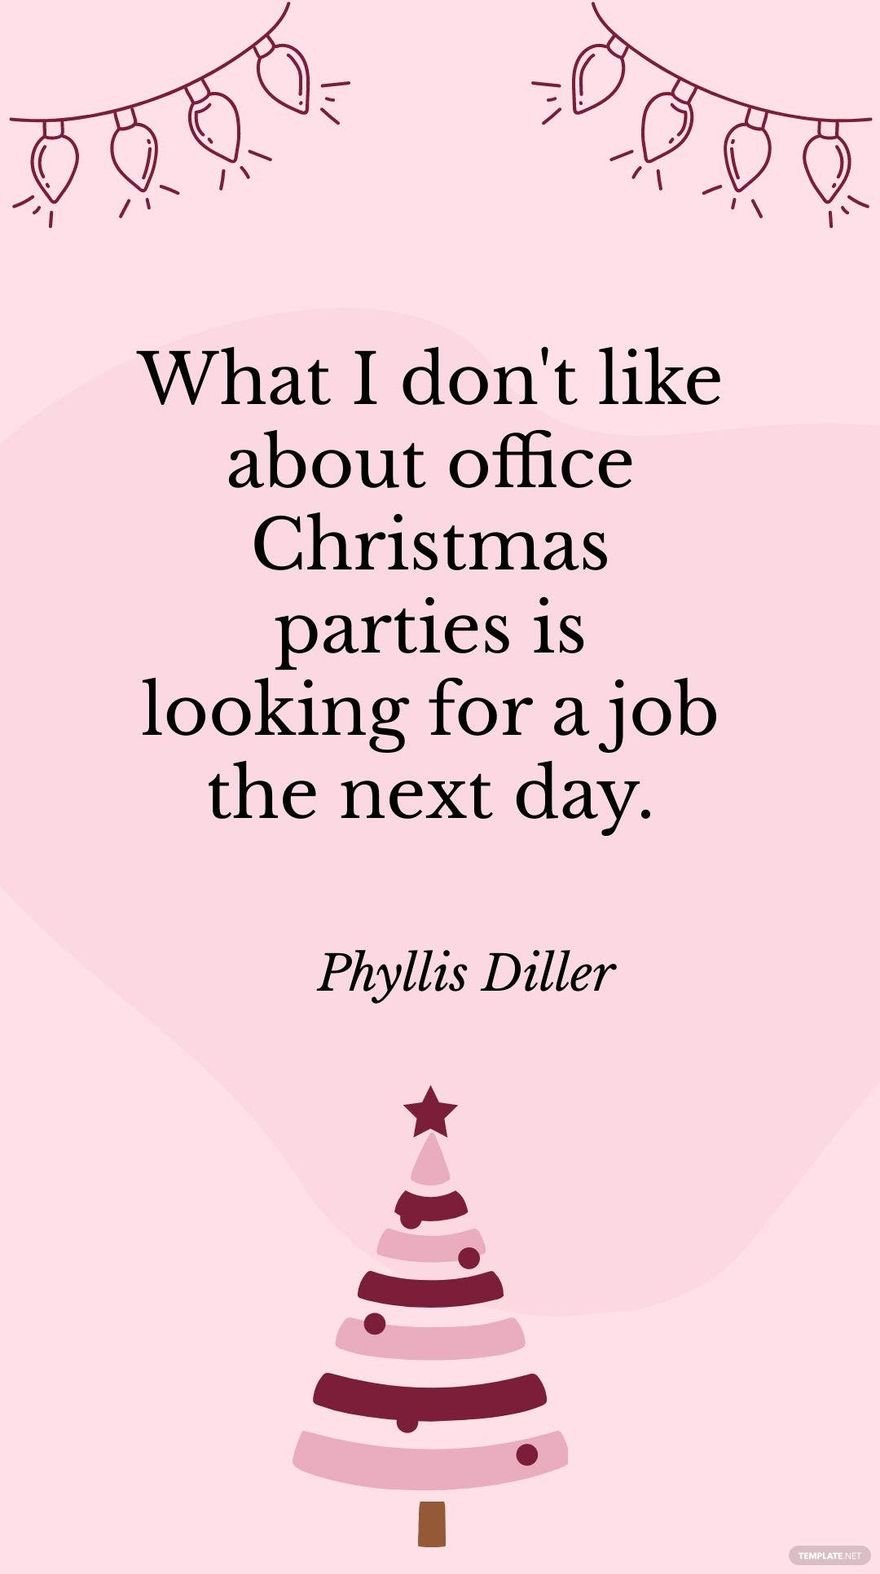 Phyllis Diller - What I don't like about office Christmas parties is looking for a job the next day. in JPG